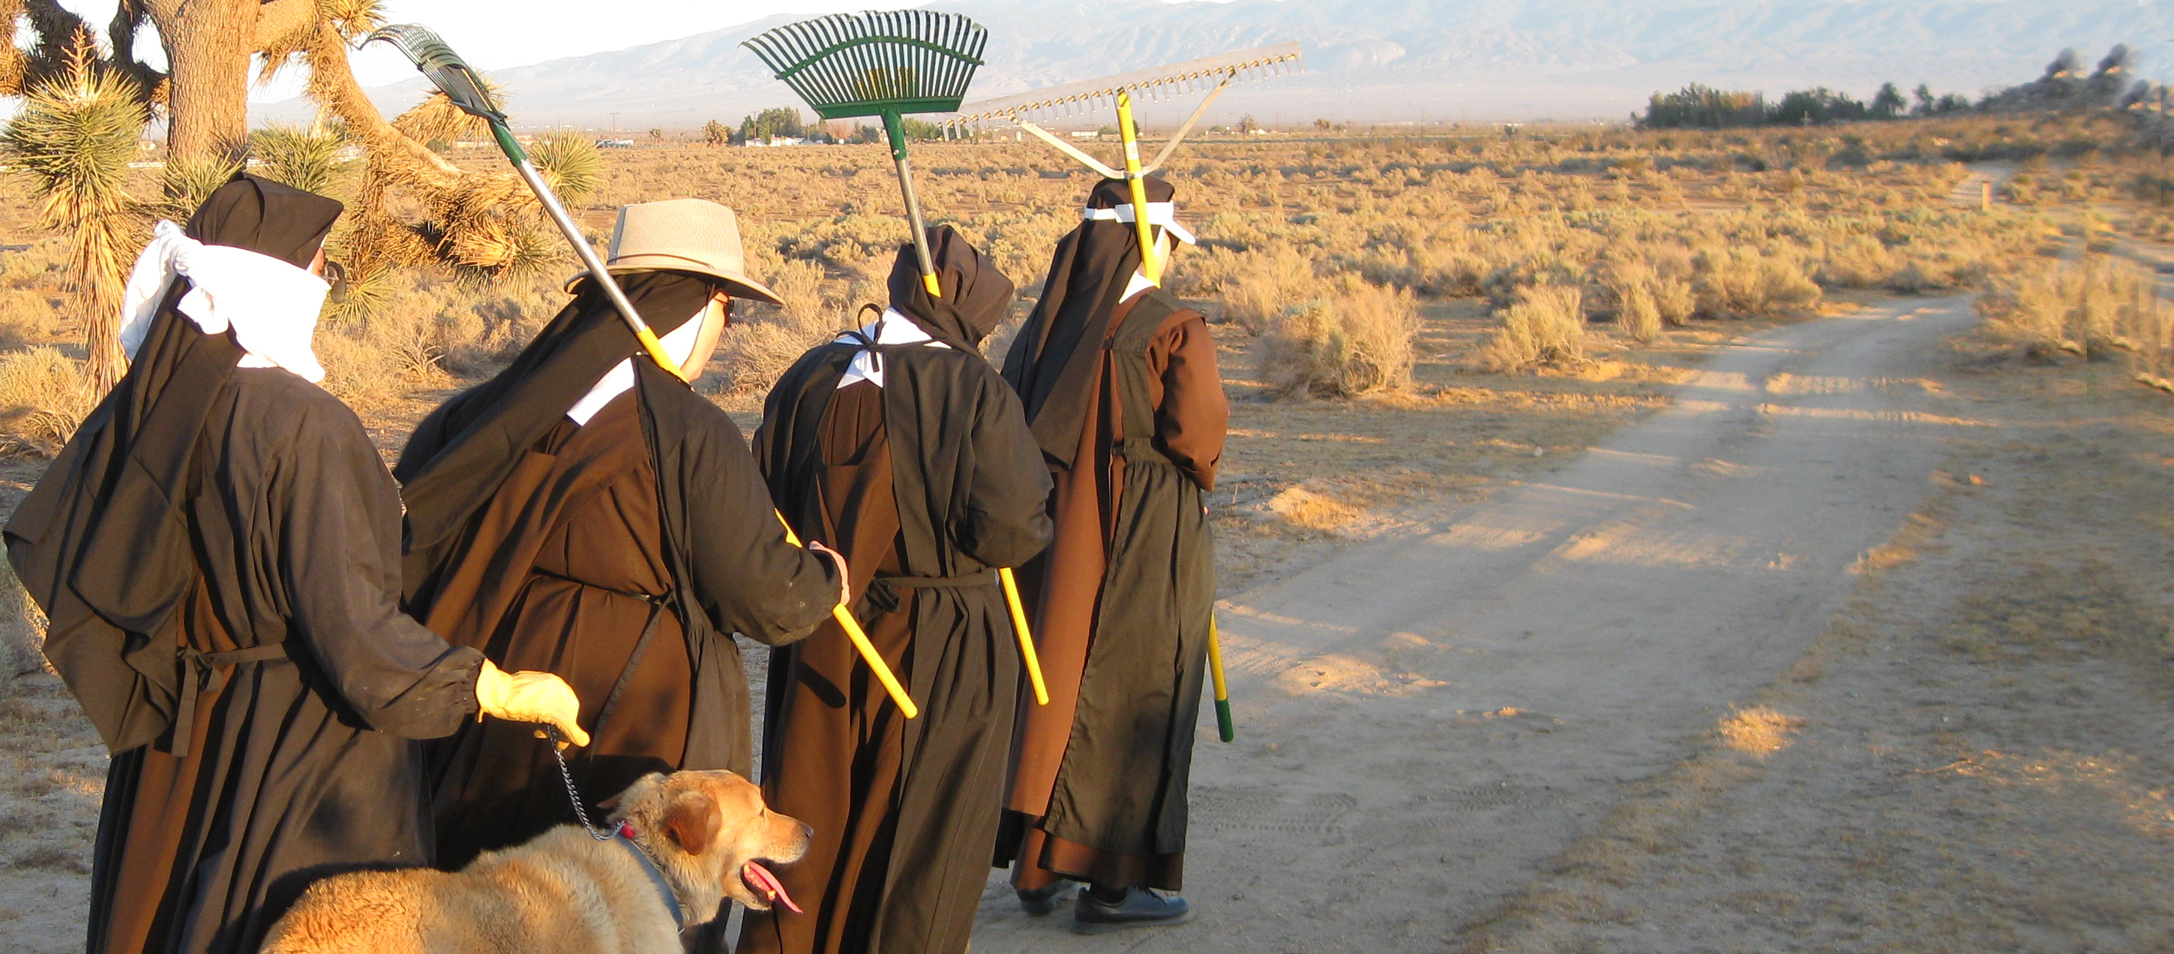 Carmelite Sisters holding tools, walking to work outside